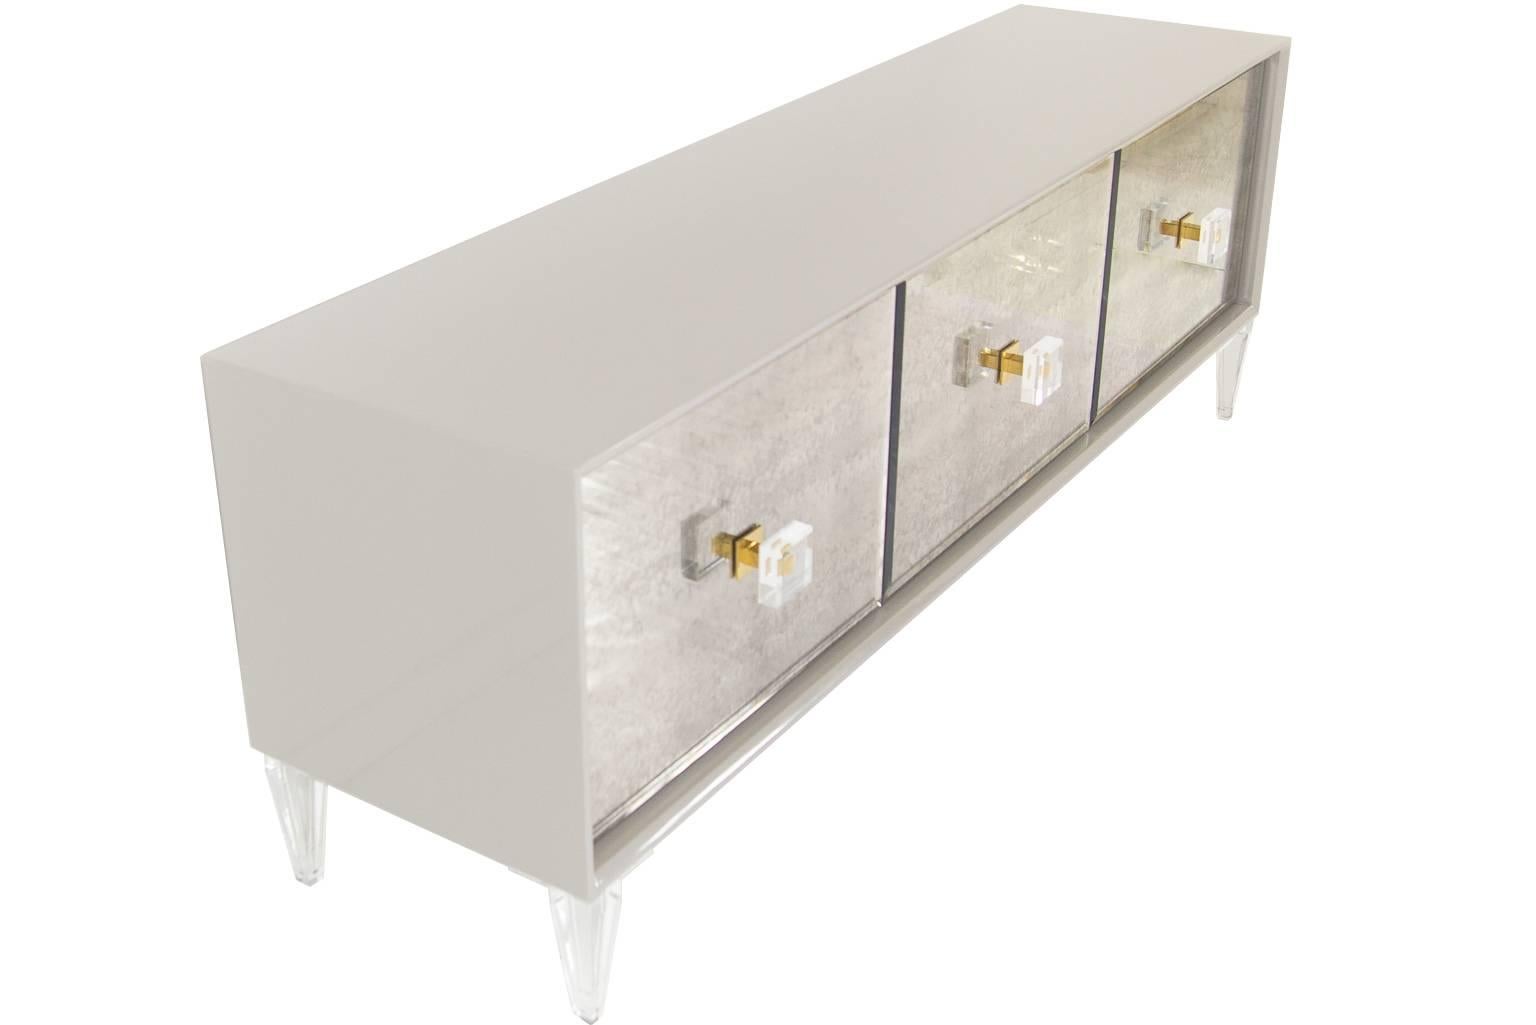 The Juliette Credenza with Modshop's classic matte white or Greystone finish and gorgeous antique mirrors is sure to stun. The 3 door credenza sits on top of our 7